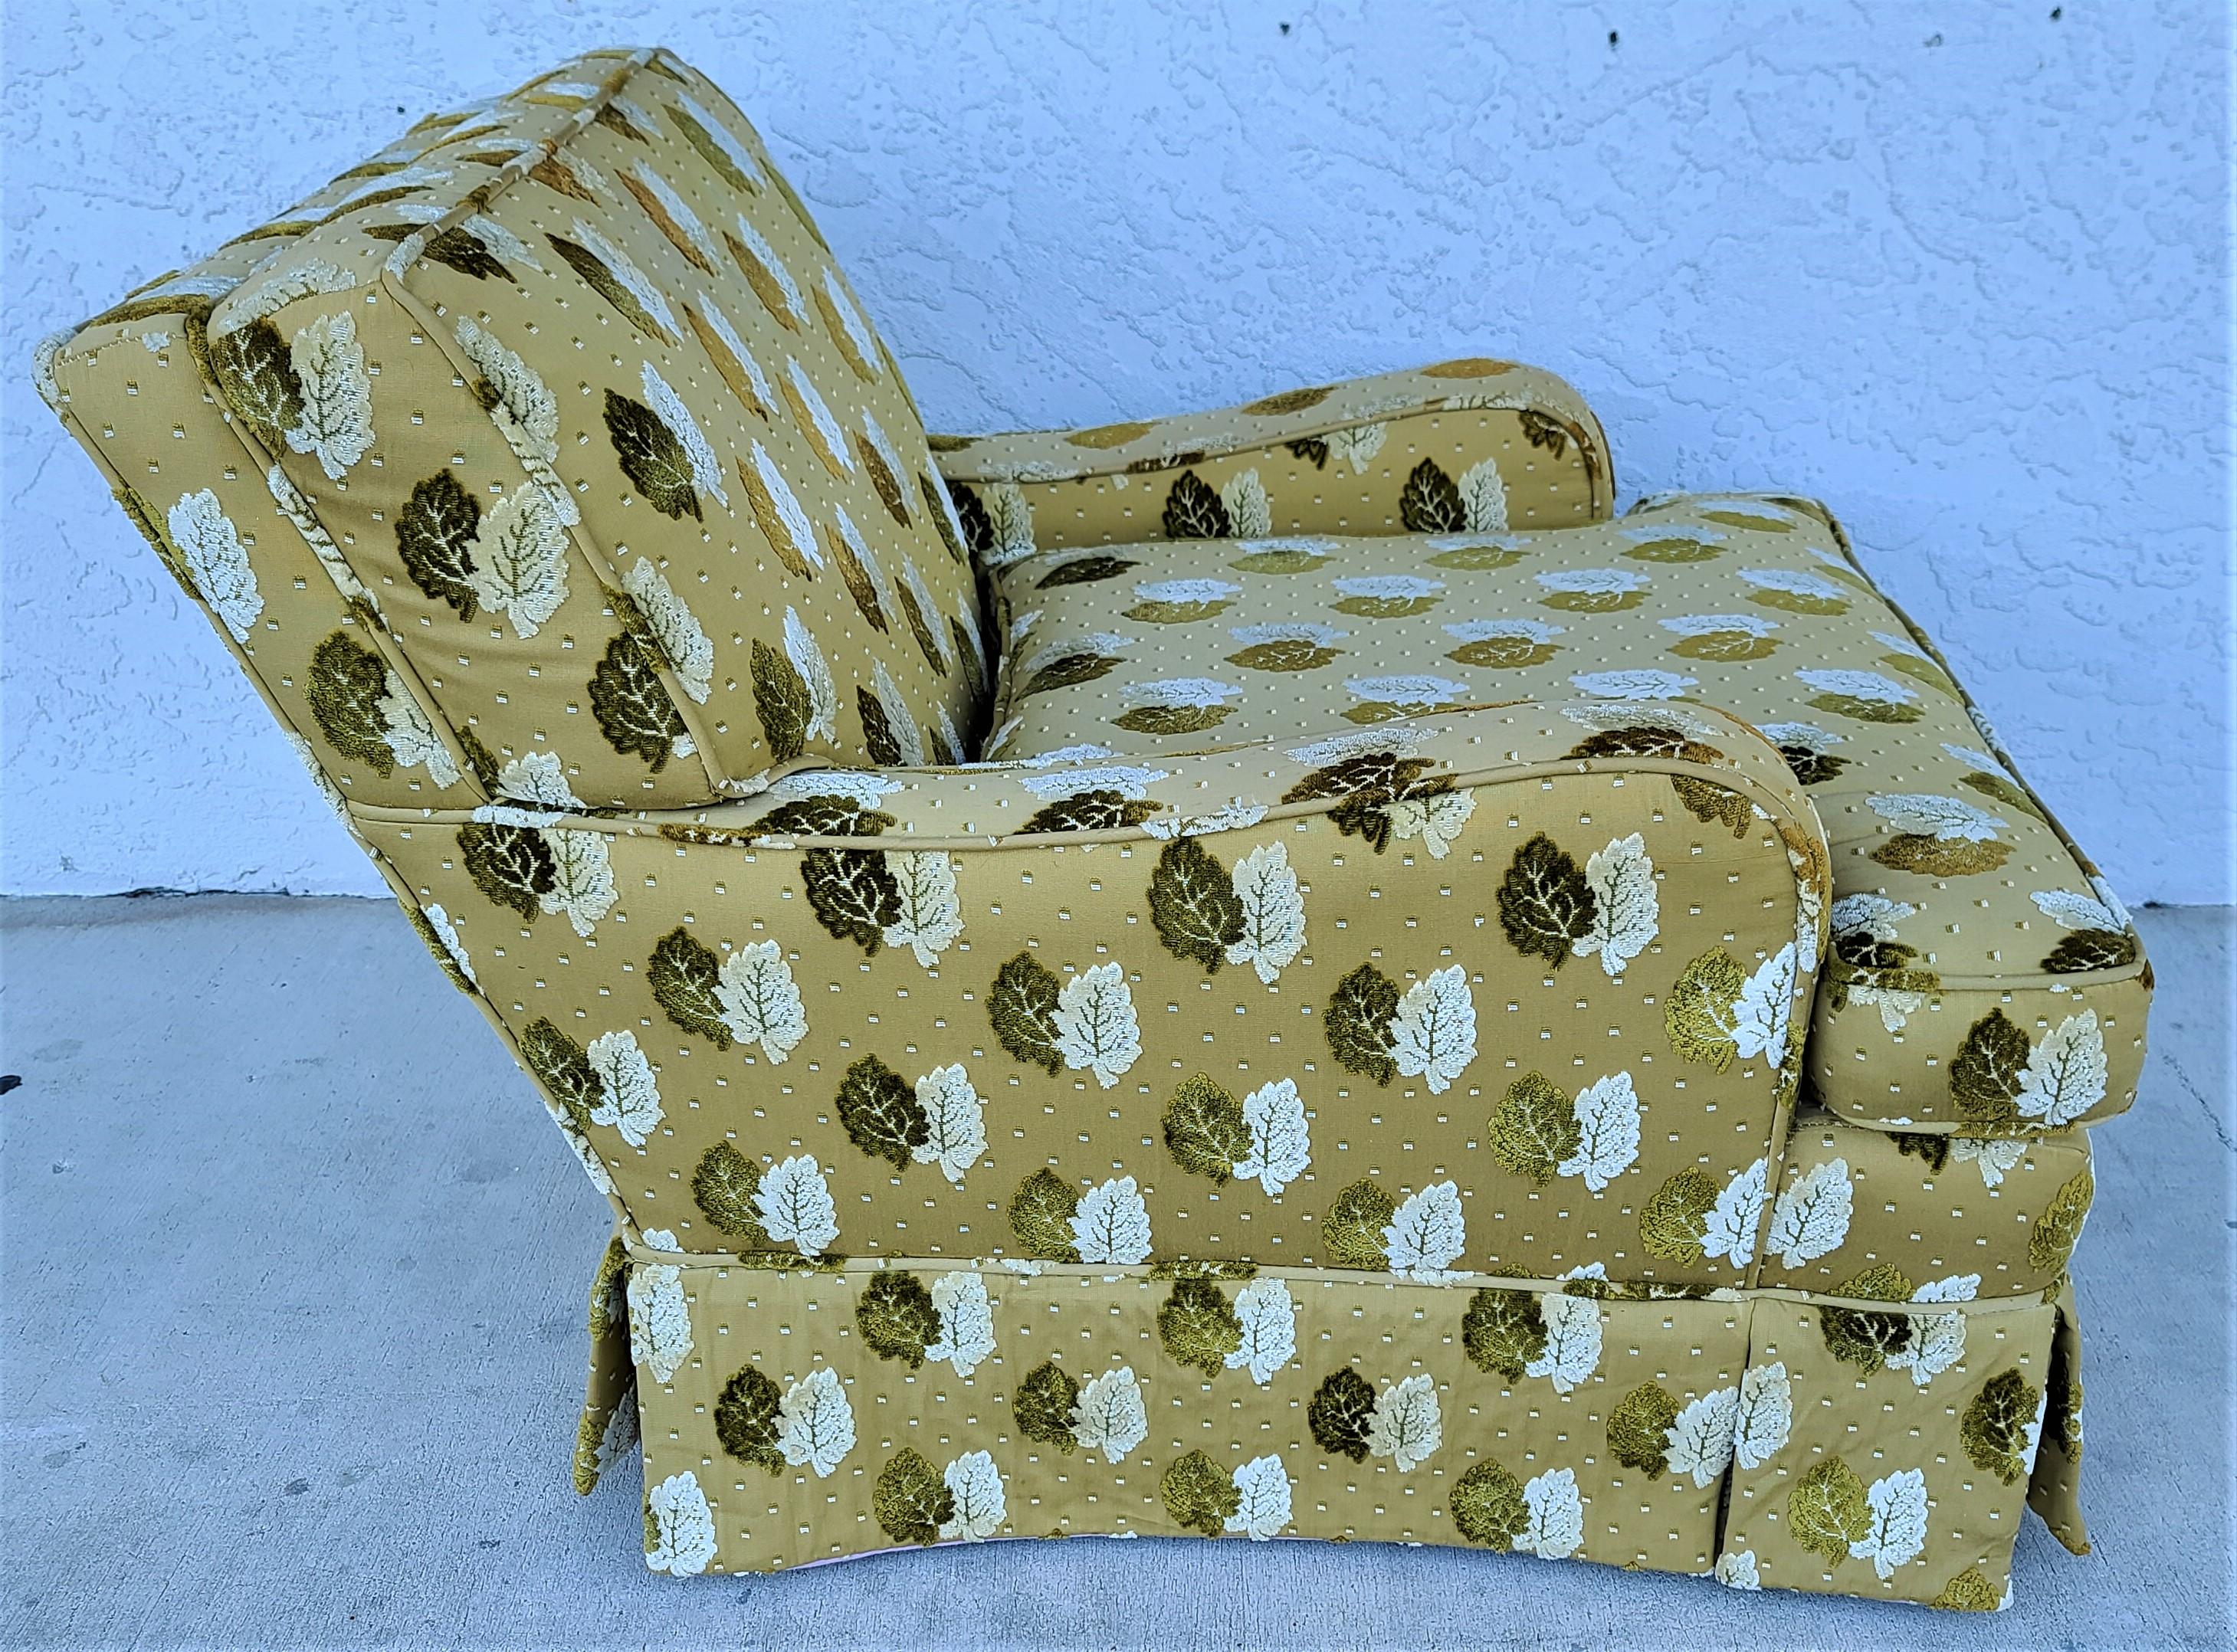 For FULL item description click on CONTINUE READING at the bottom of this page.

Vintage Rolling Lounge Club Chair with Burnout Velvet Leaves Cotton Fabric. Very Comfortable!

Coloration: Photos #1 & 2 are most accurate as to color. It is more Gold